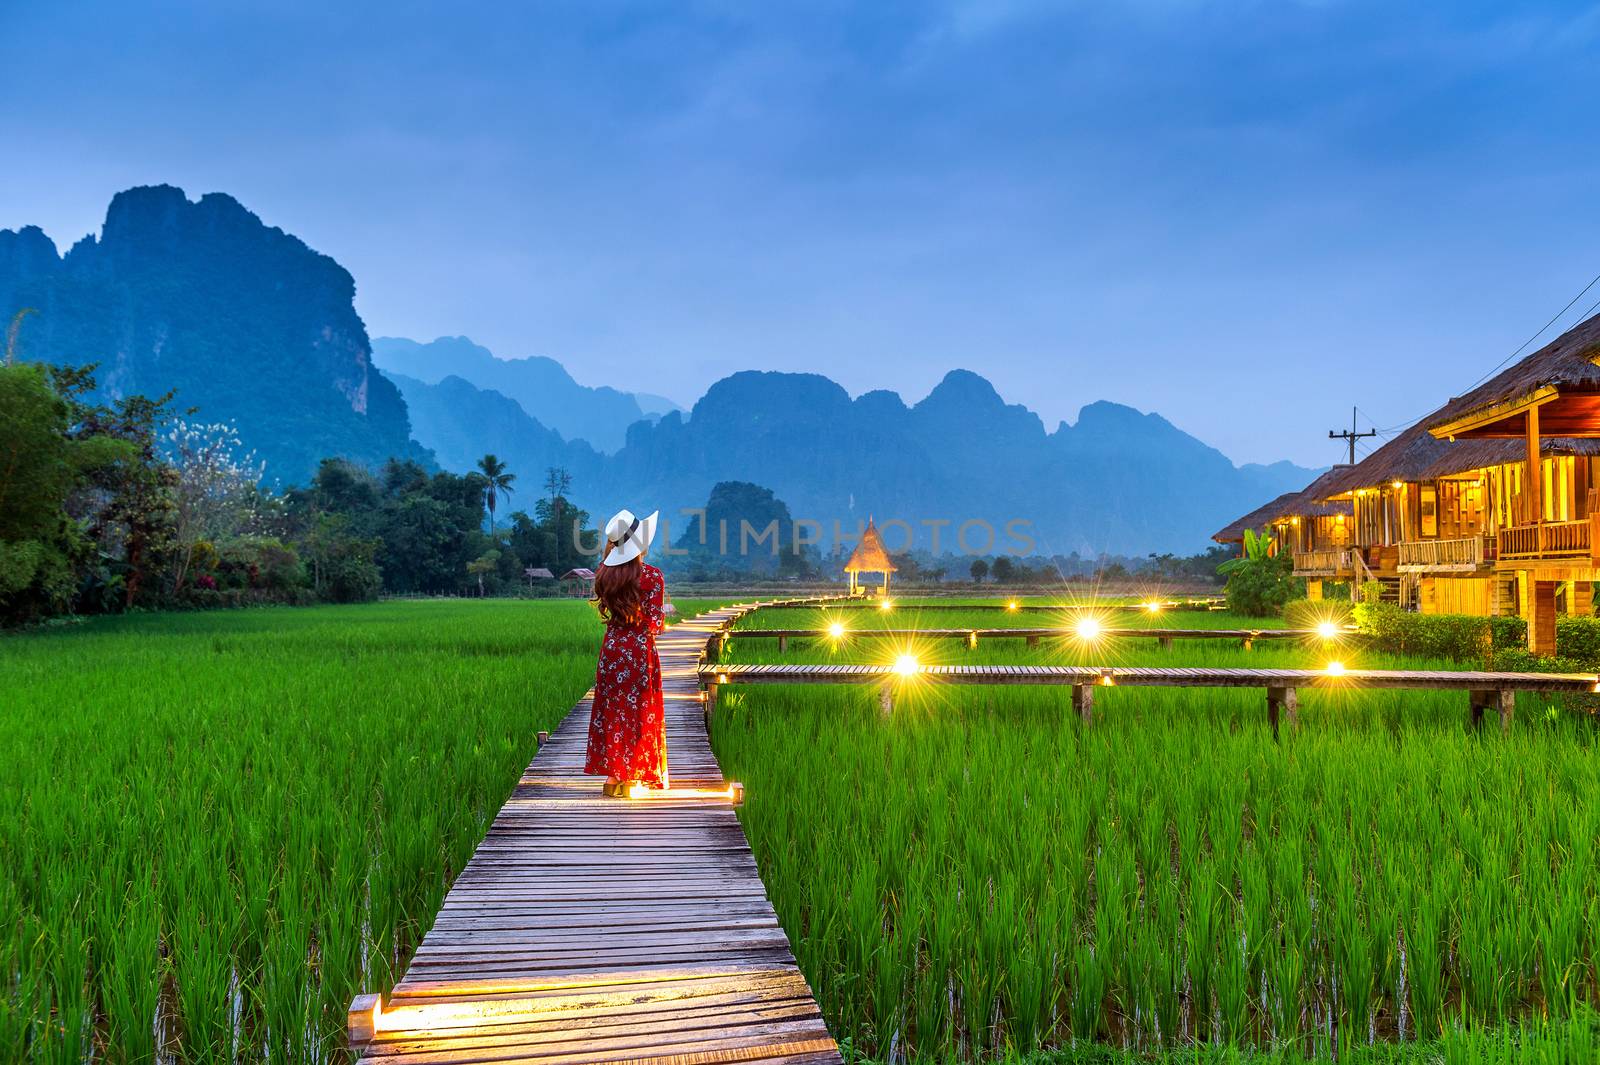 Young woman walking on wooden path with green rice field in Vang Vieng, Laos. by gutarphotoghaphy